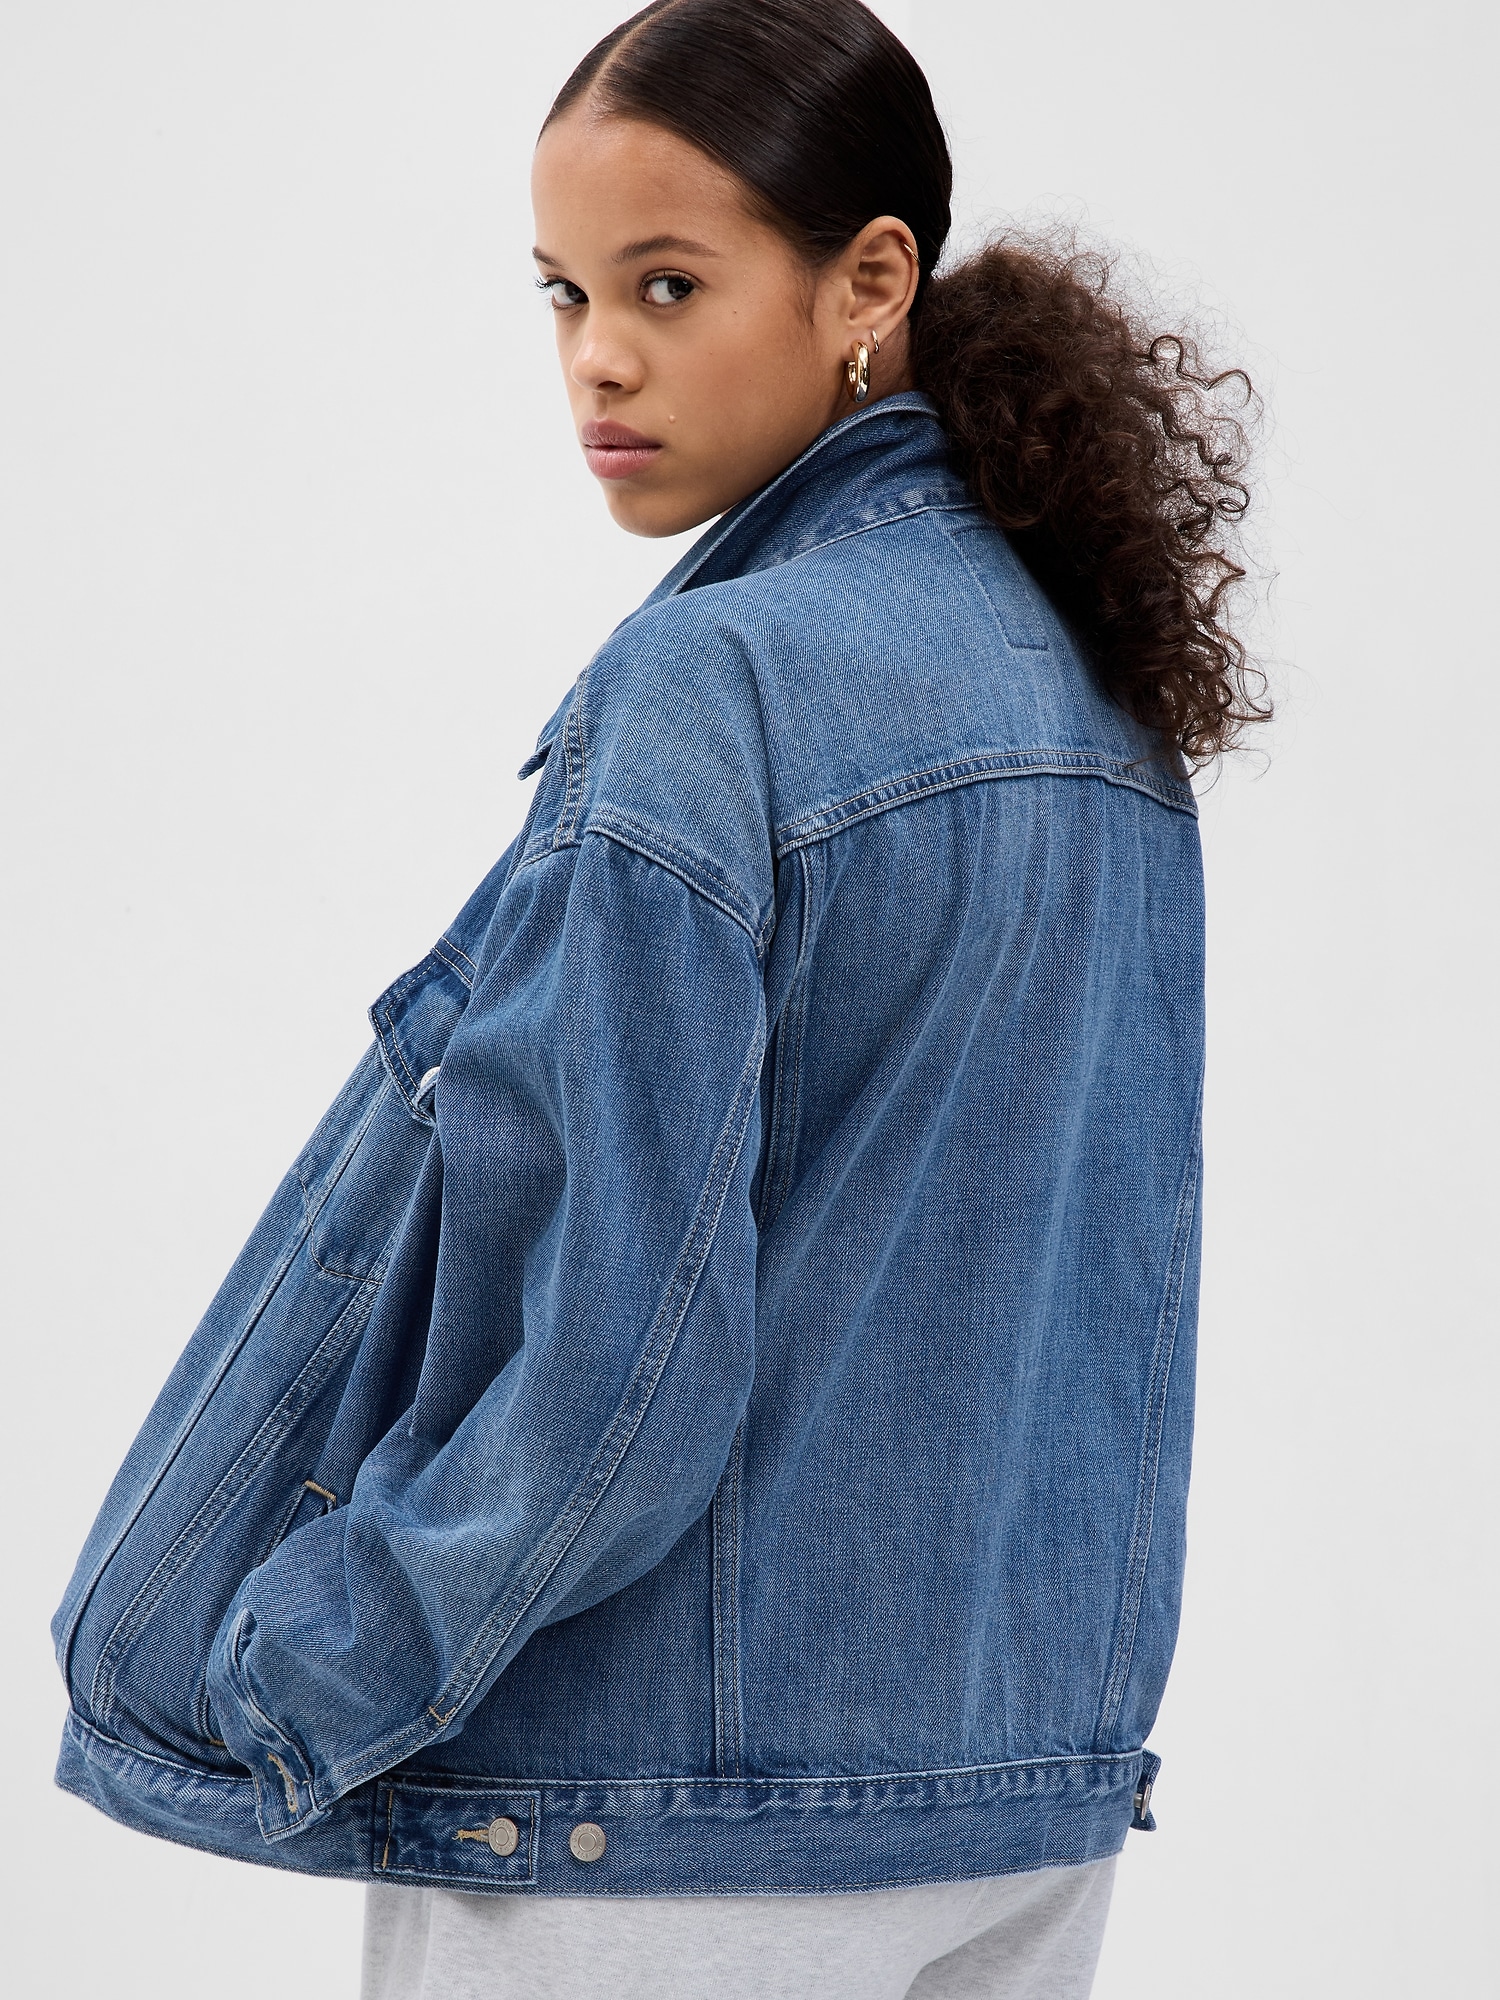 Elevate Your Style with Women's Oversized Denim Jackets – Jeans4you.shop